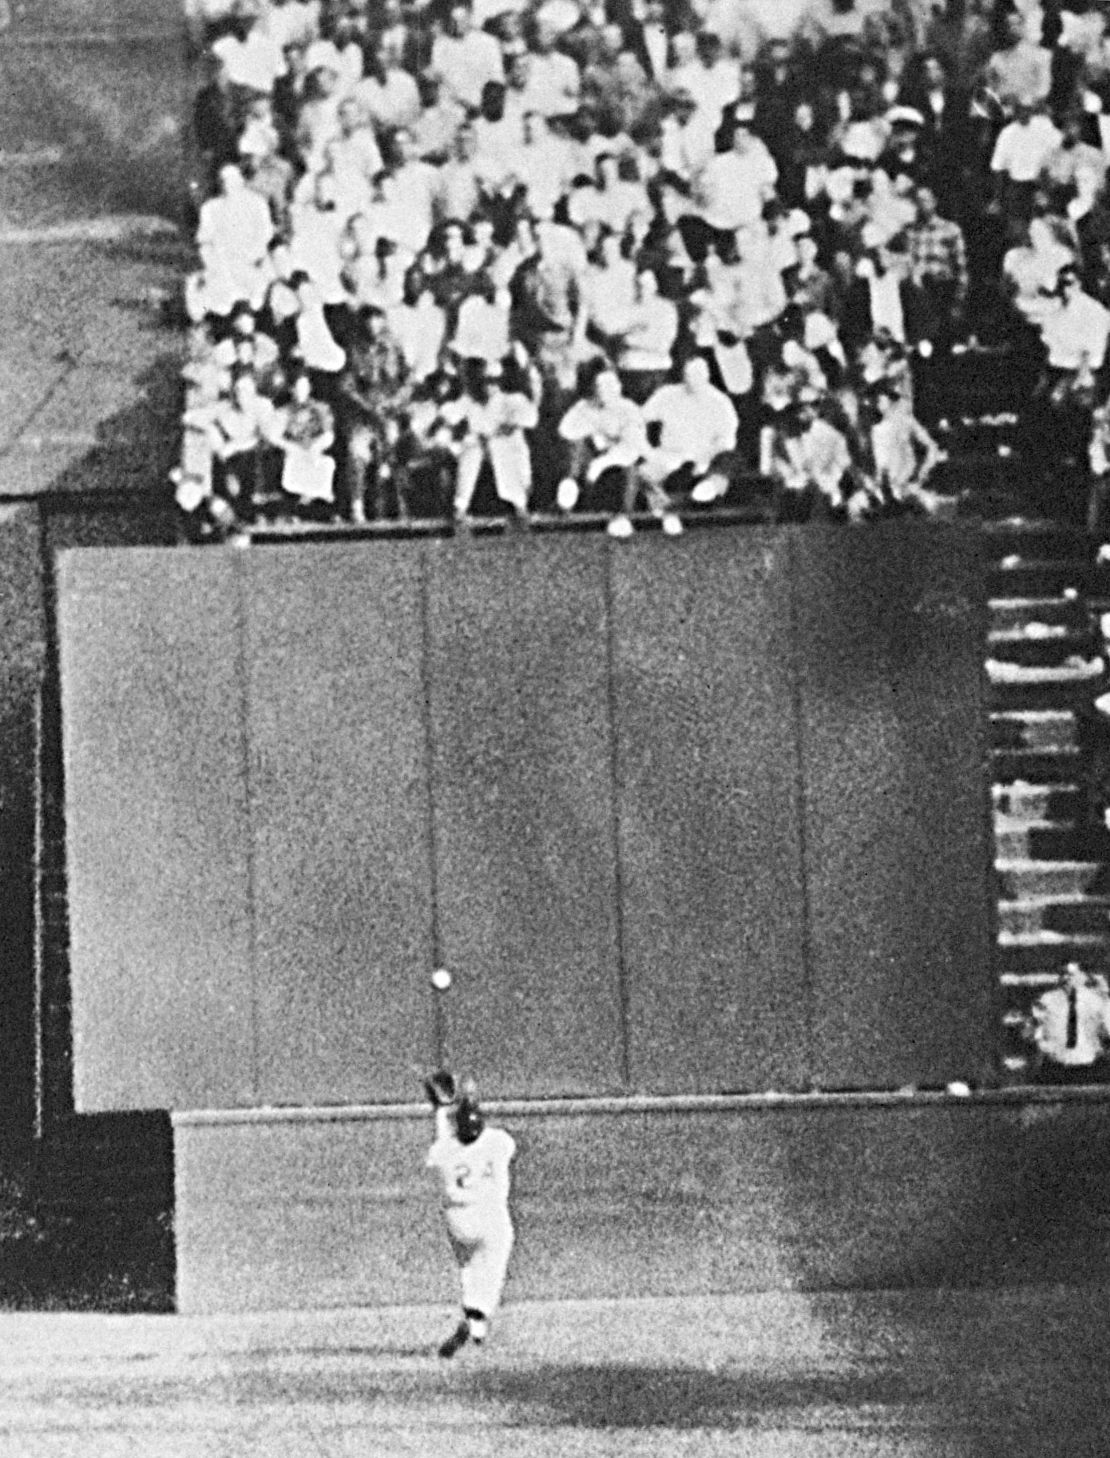 FILE - New York Giants center fielder Willie Mays, with his back to the plate, gets under a blast off the bat of Cleveland Indians first baseman Vic Wertz to pull the ball down in front of the bleachers wall in the eighth inning of Game 1 of the 1954 World Series, still widely considered baseball's greatest catch.